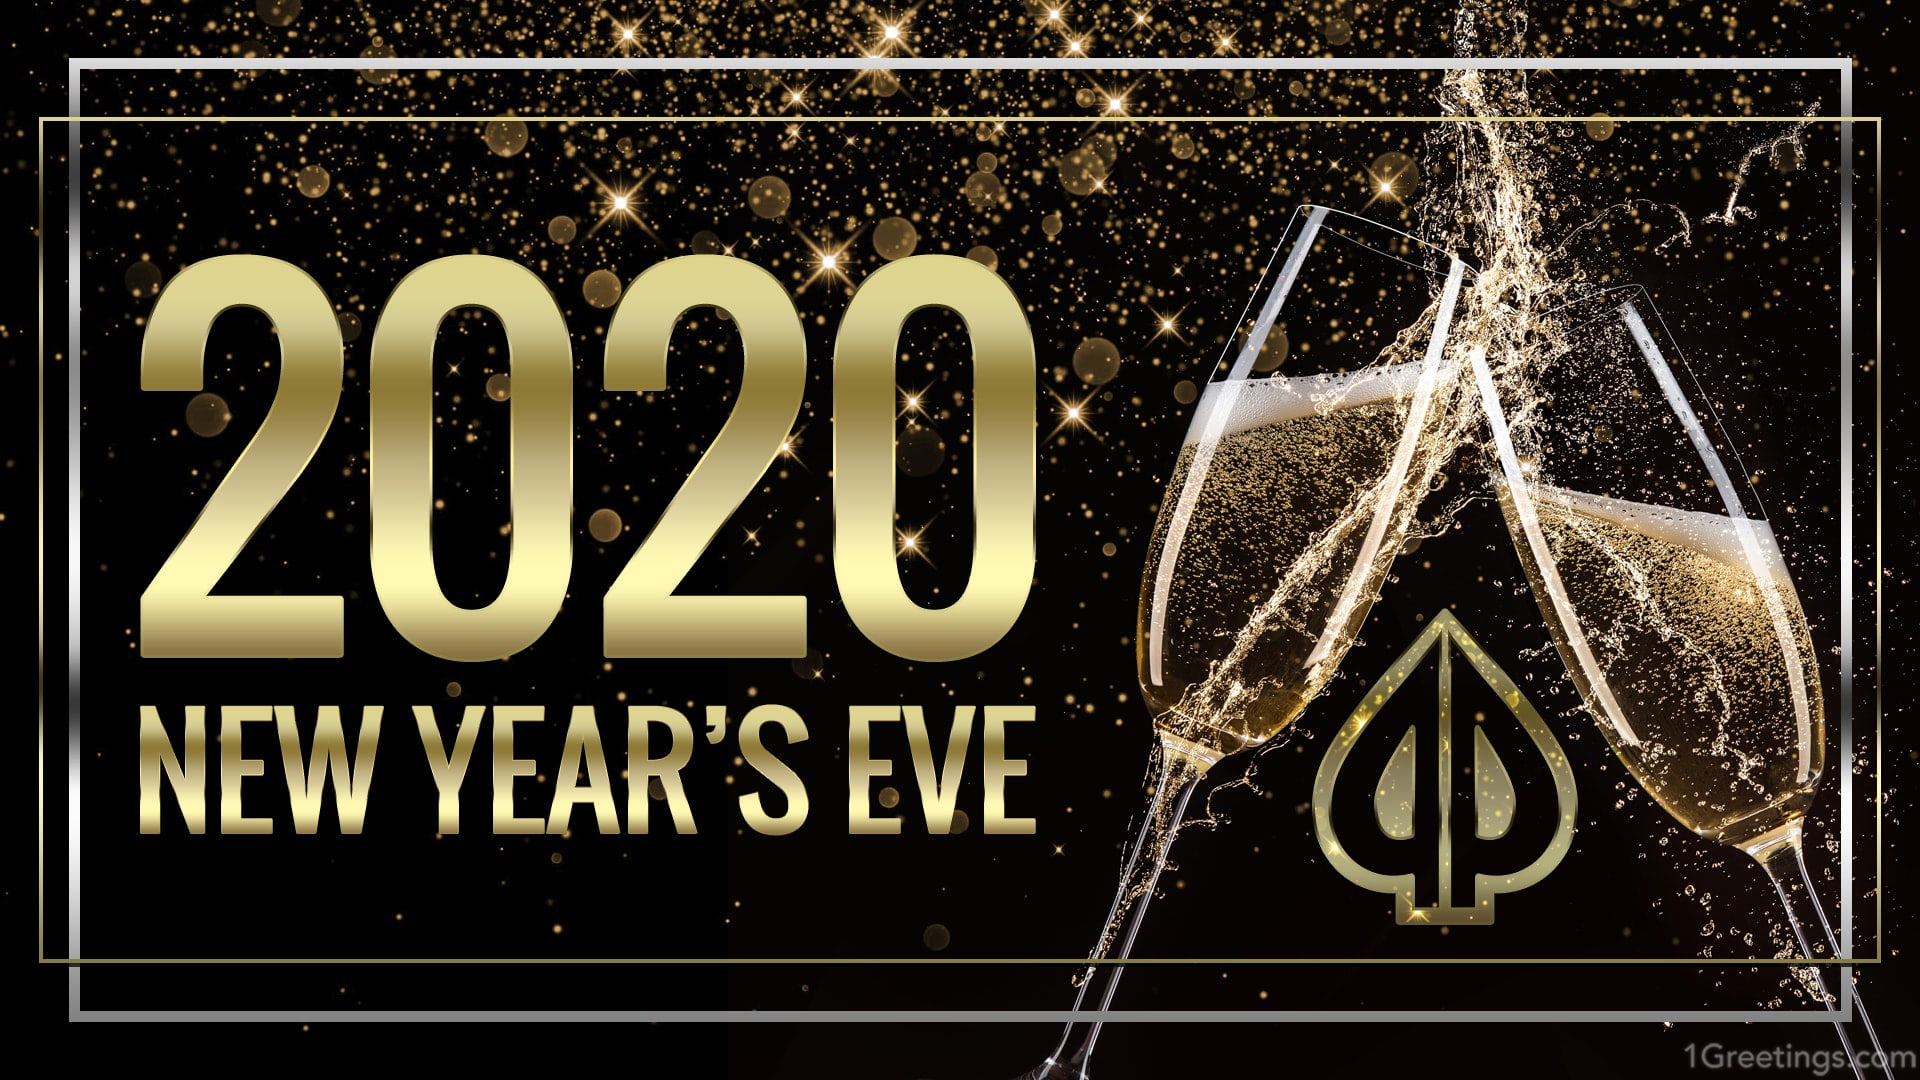 2020 New Year's Eve wallpaper free download